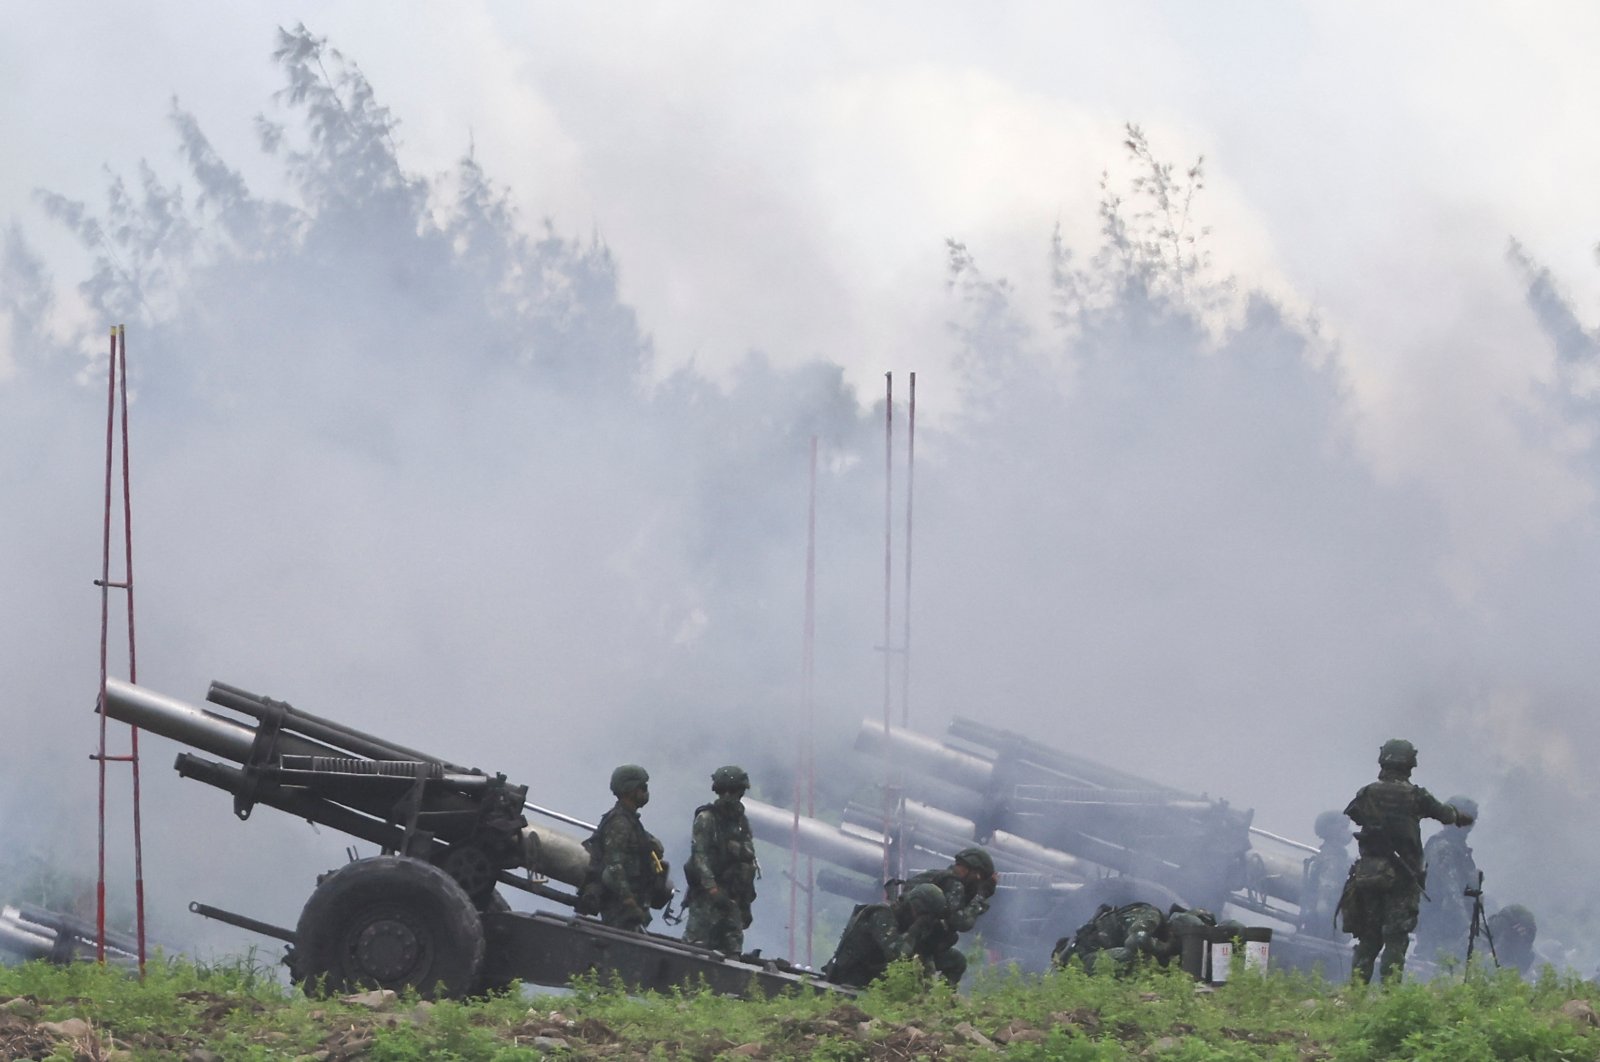 Soldiers fire 155mm howitzers during an annual live fire military exercise in Pingtung county, southern Taiwan, Aug. 9, 2022. (Reuters Photo)